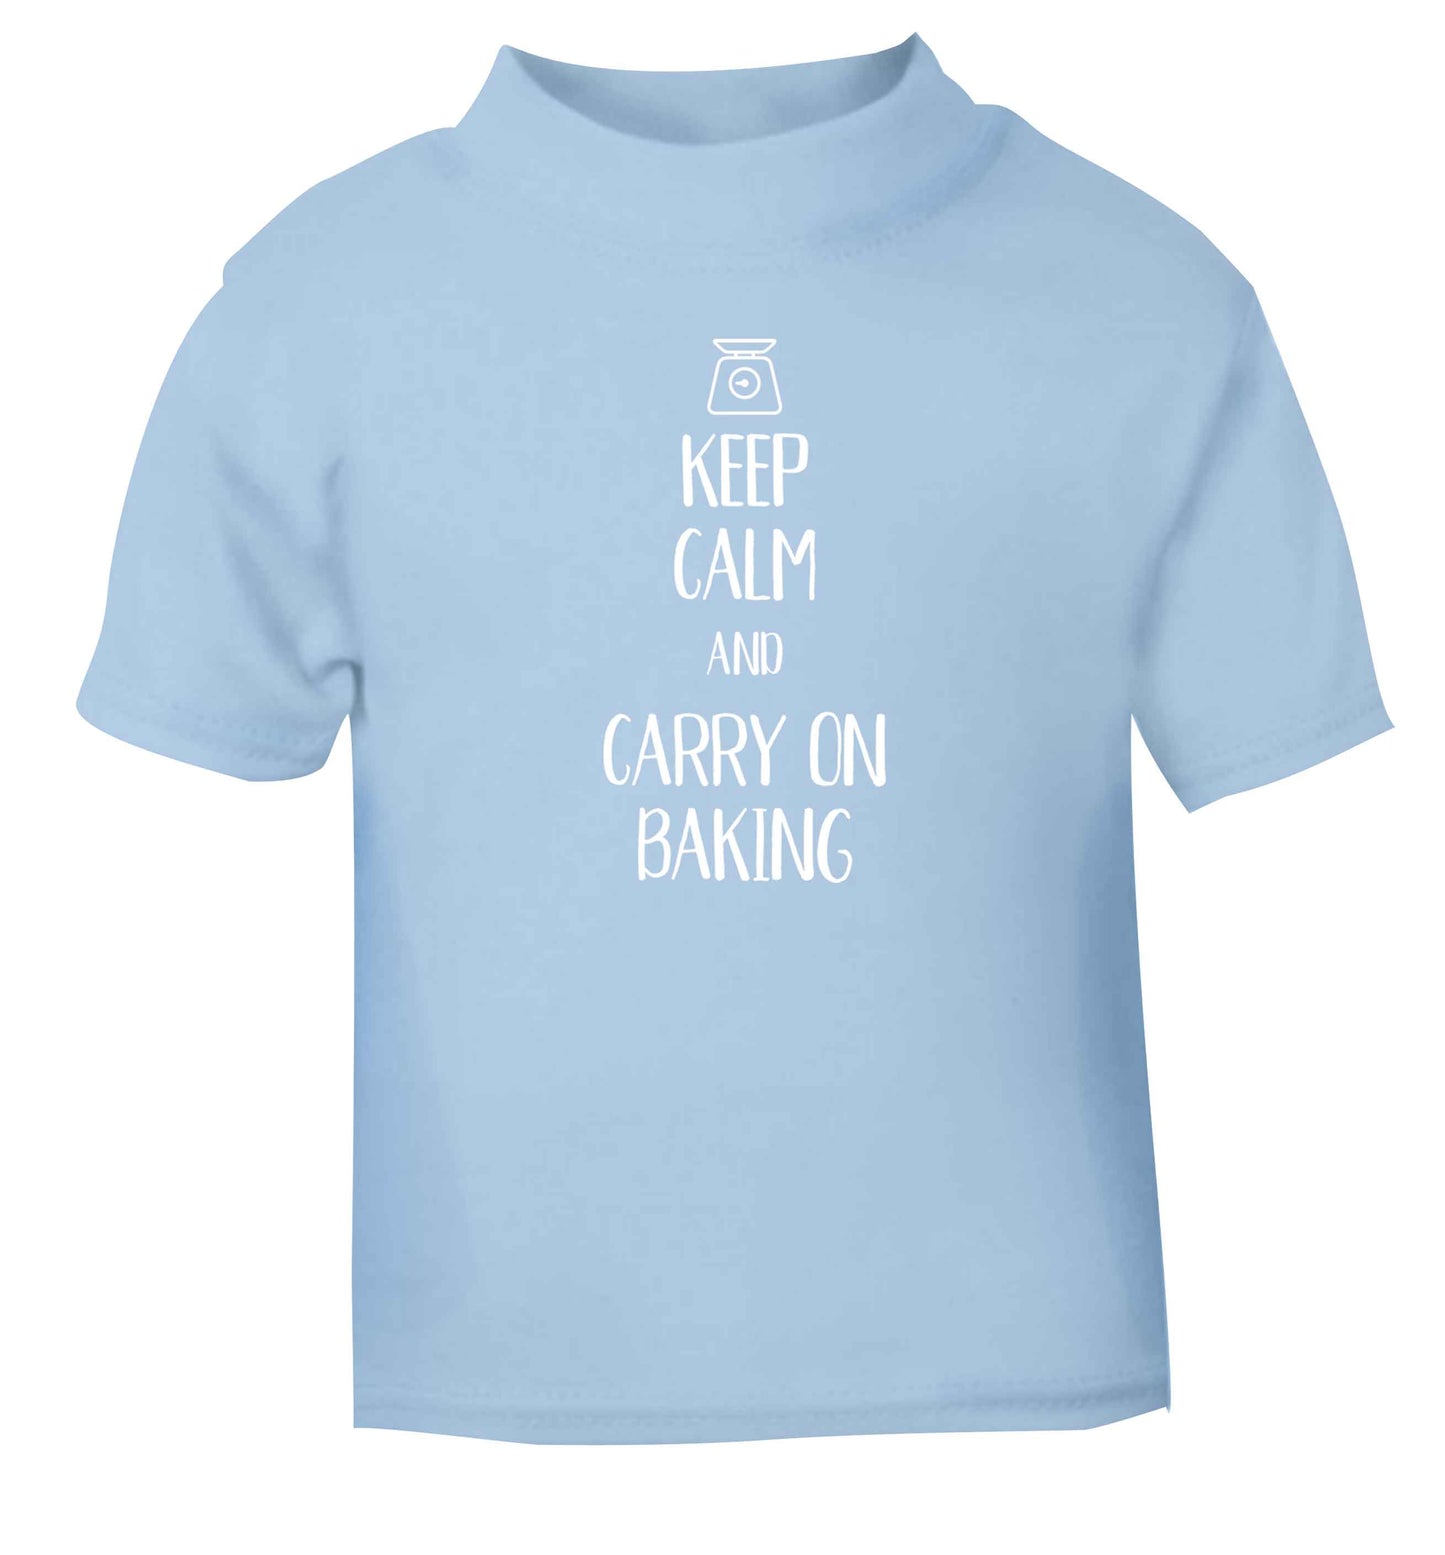 Keep calm and carry on baking light blue Baby Toddler Tshirt 2 Years